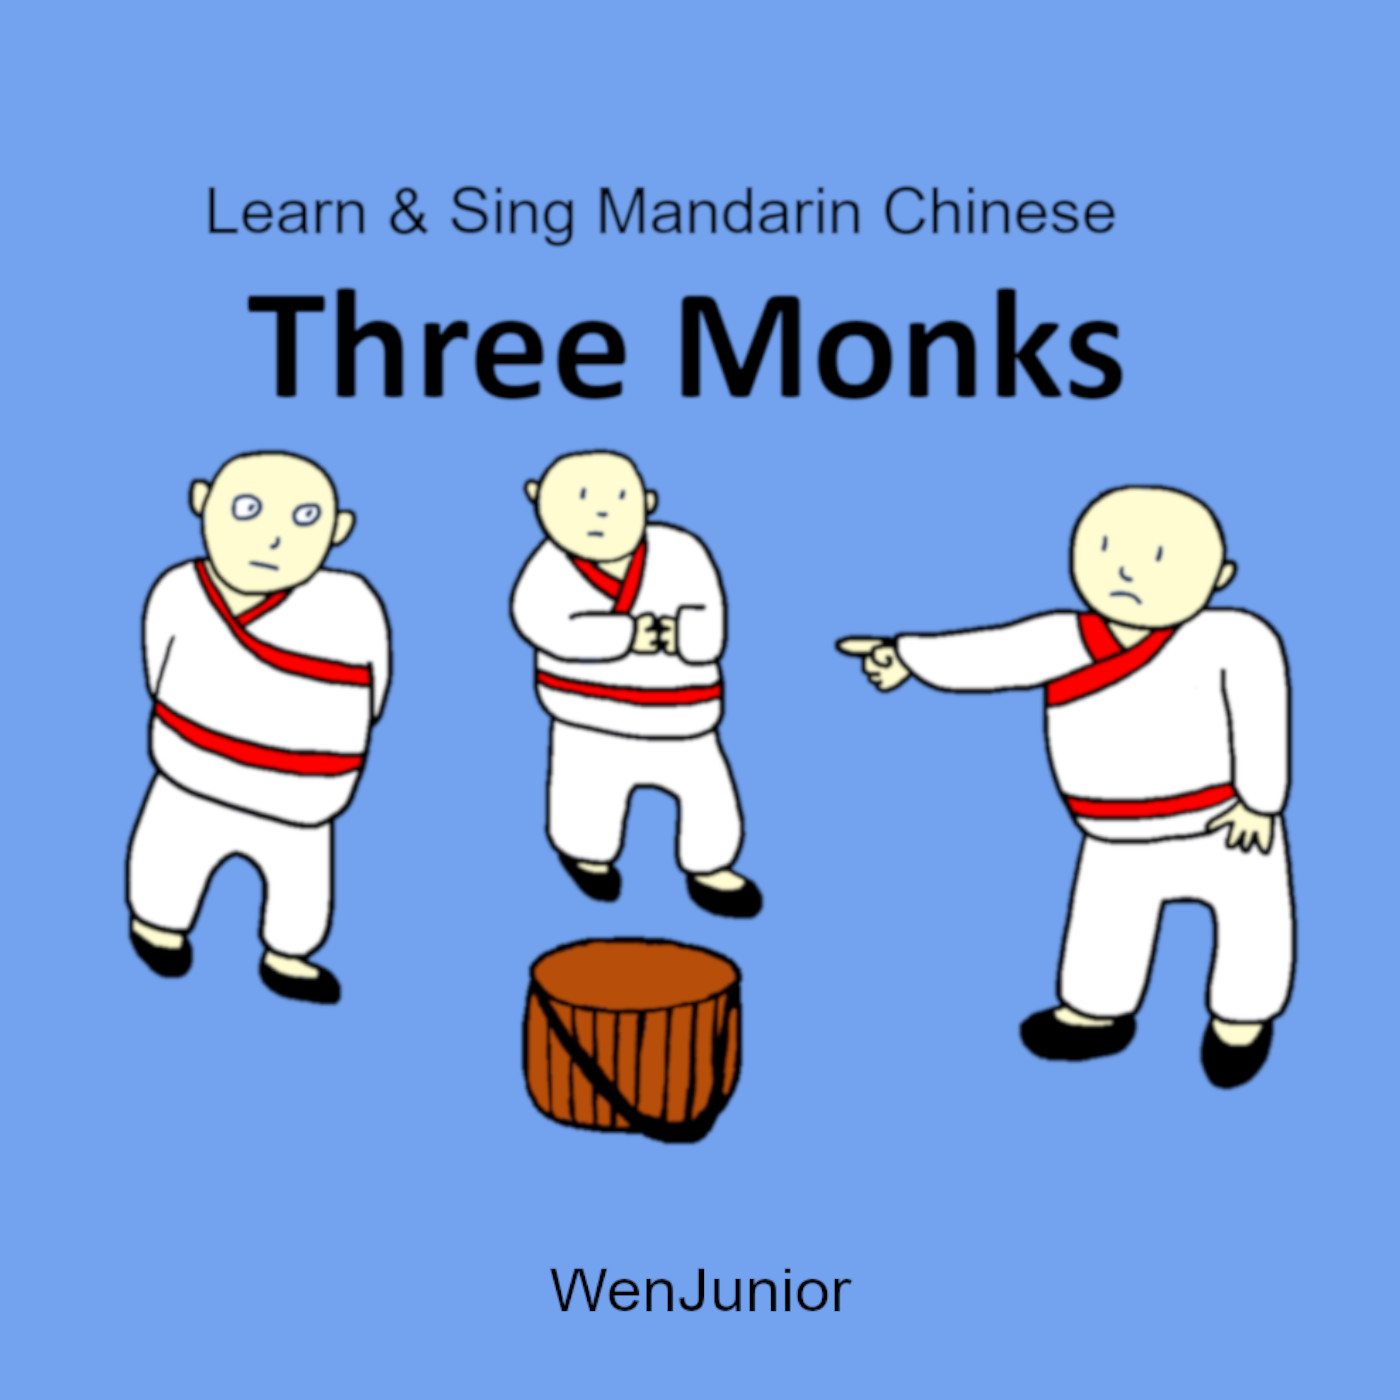 Let's Learn a Chinese Folktale, Three Monks, through Singing